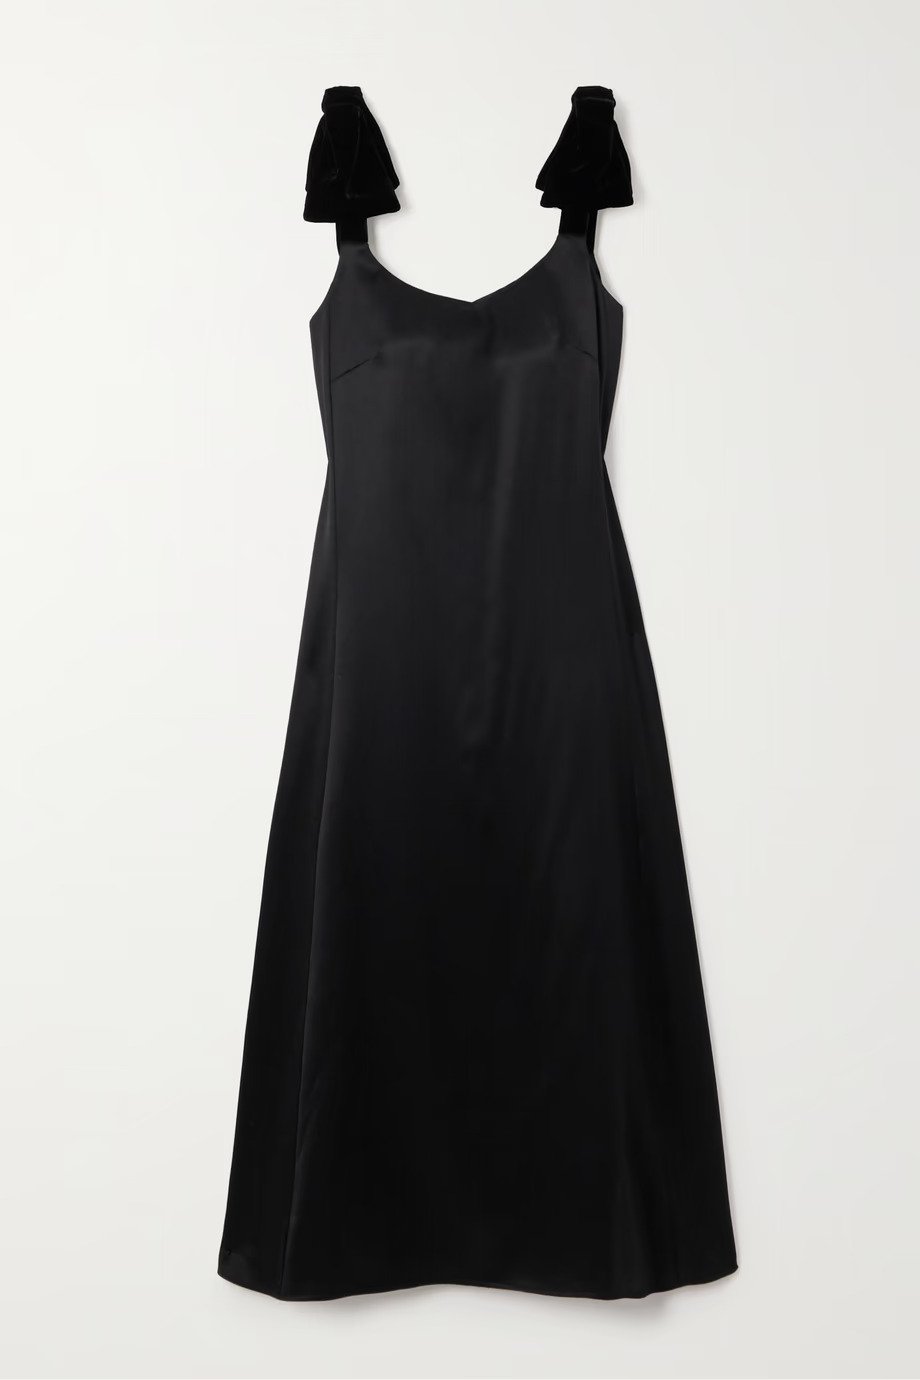 Can You Wear Black to a Wedding? 21 Dresses to Try | Who What Wear UK